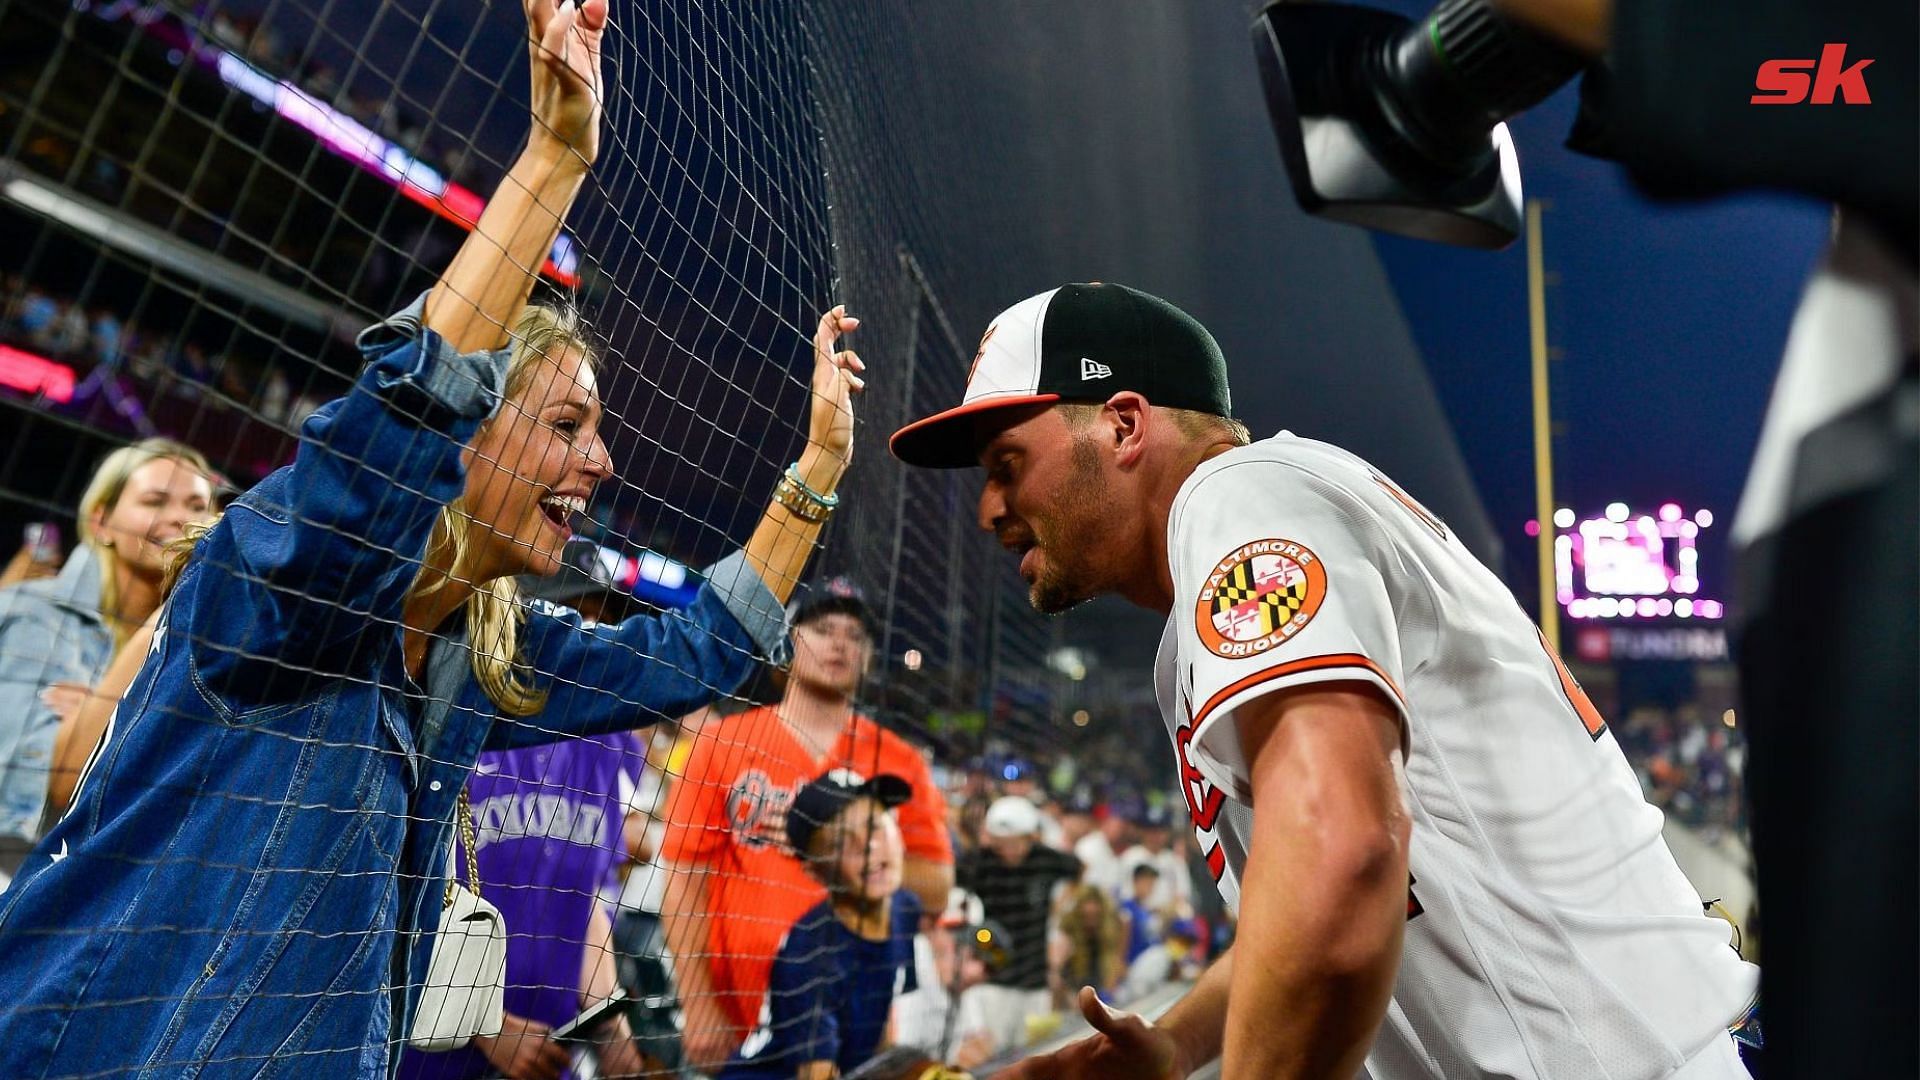 In Photos: Trey Mancini and his wife Sara Perlman glam up to join forces with Chicago Cubs